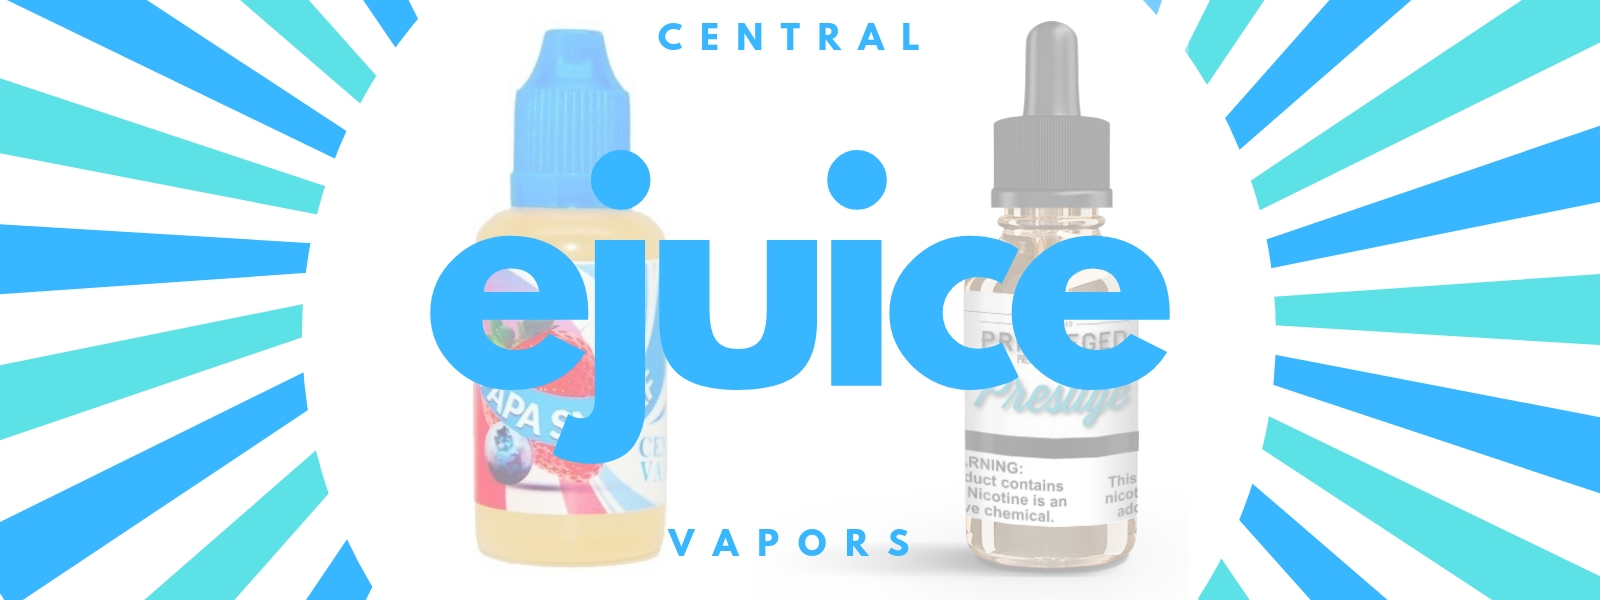 Central Vapors Ejuice Review - Find My Vapes